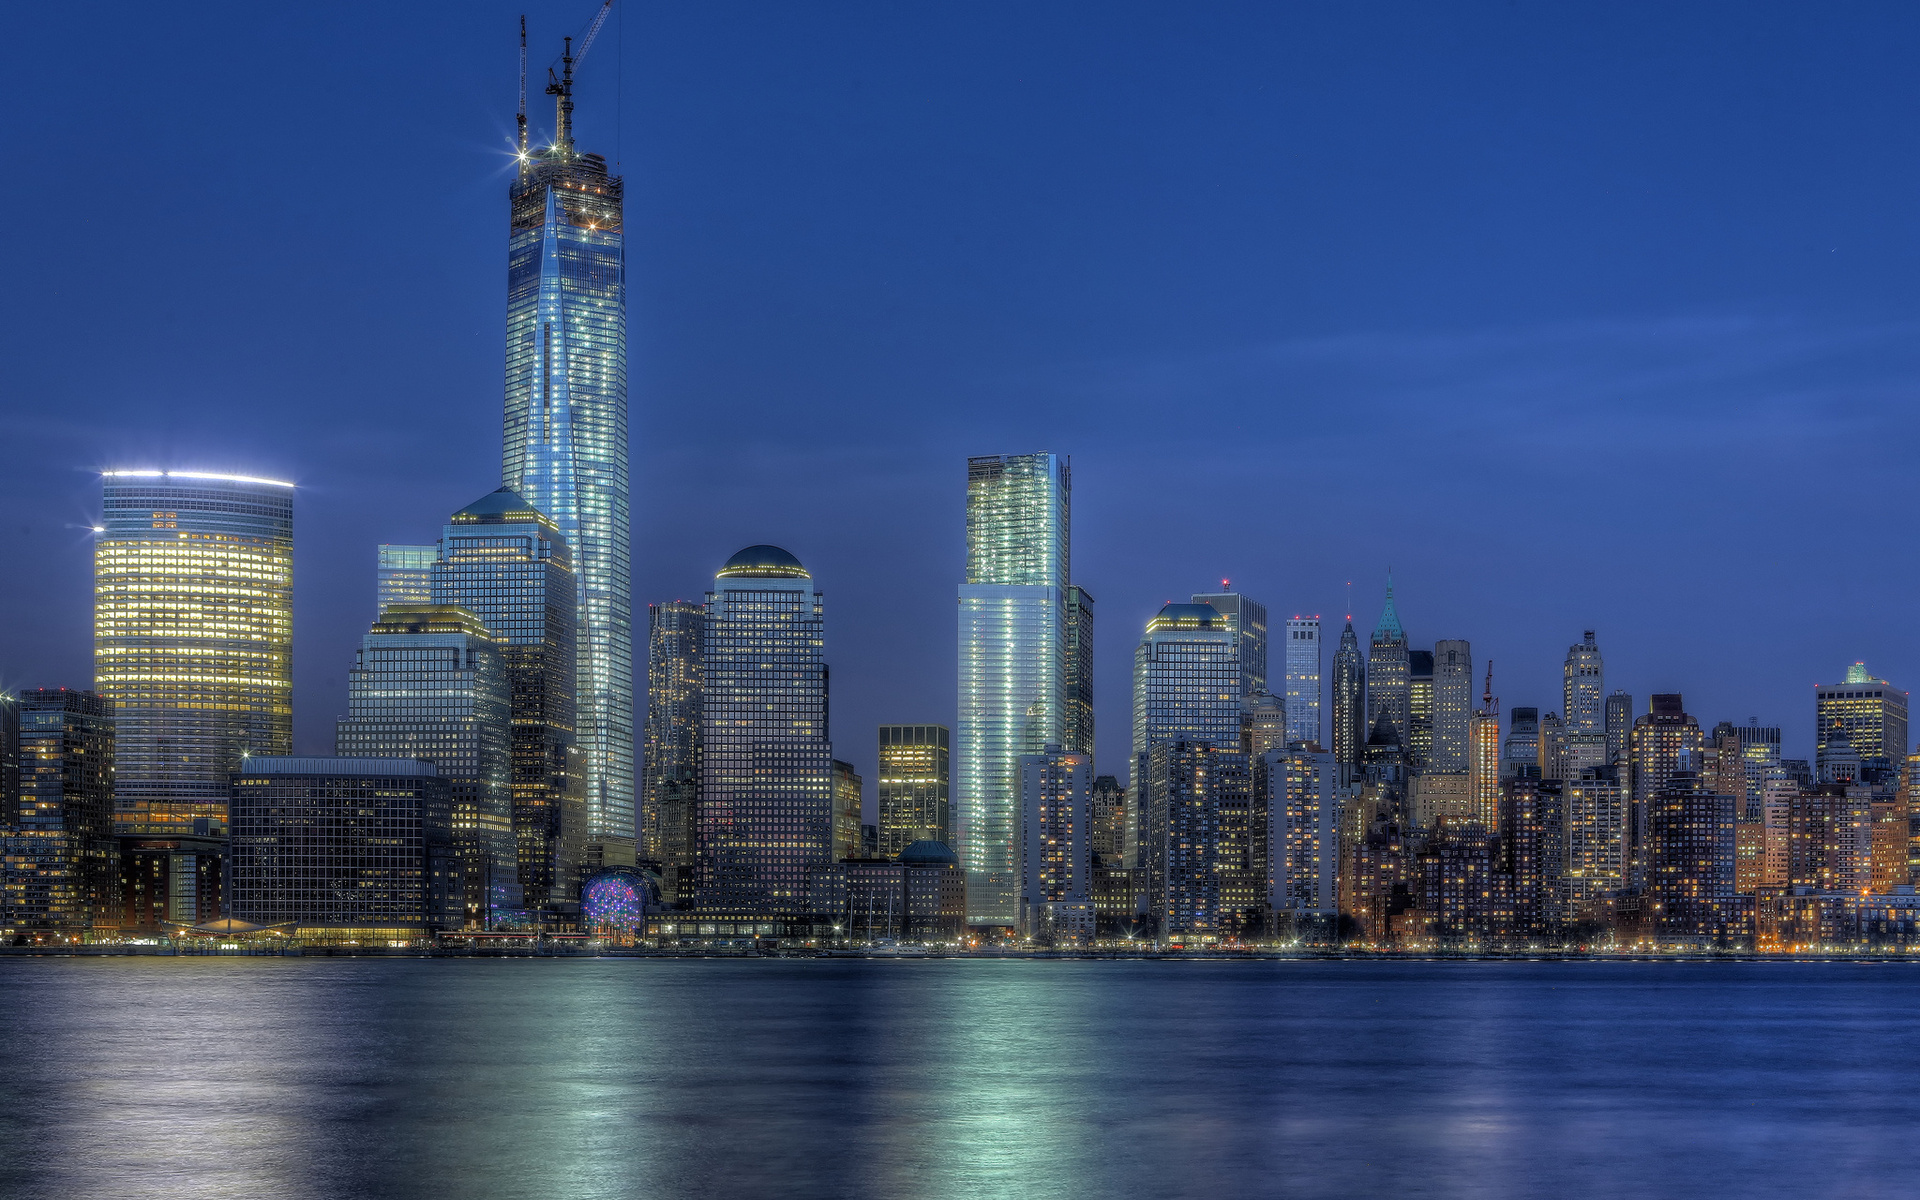 3 One World Trade Center Hd Wallpapers | Backgrounds - Wallpaper Abyss